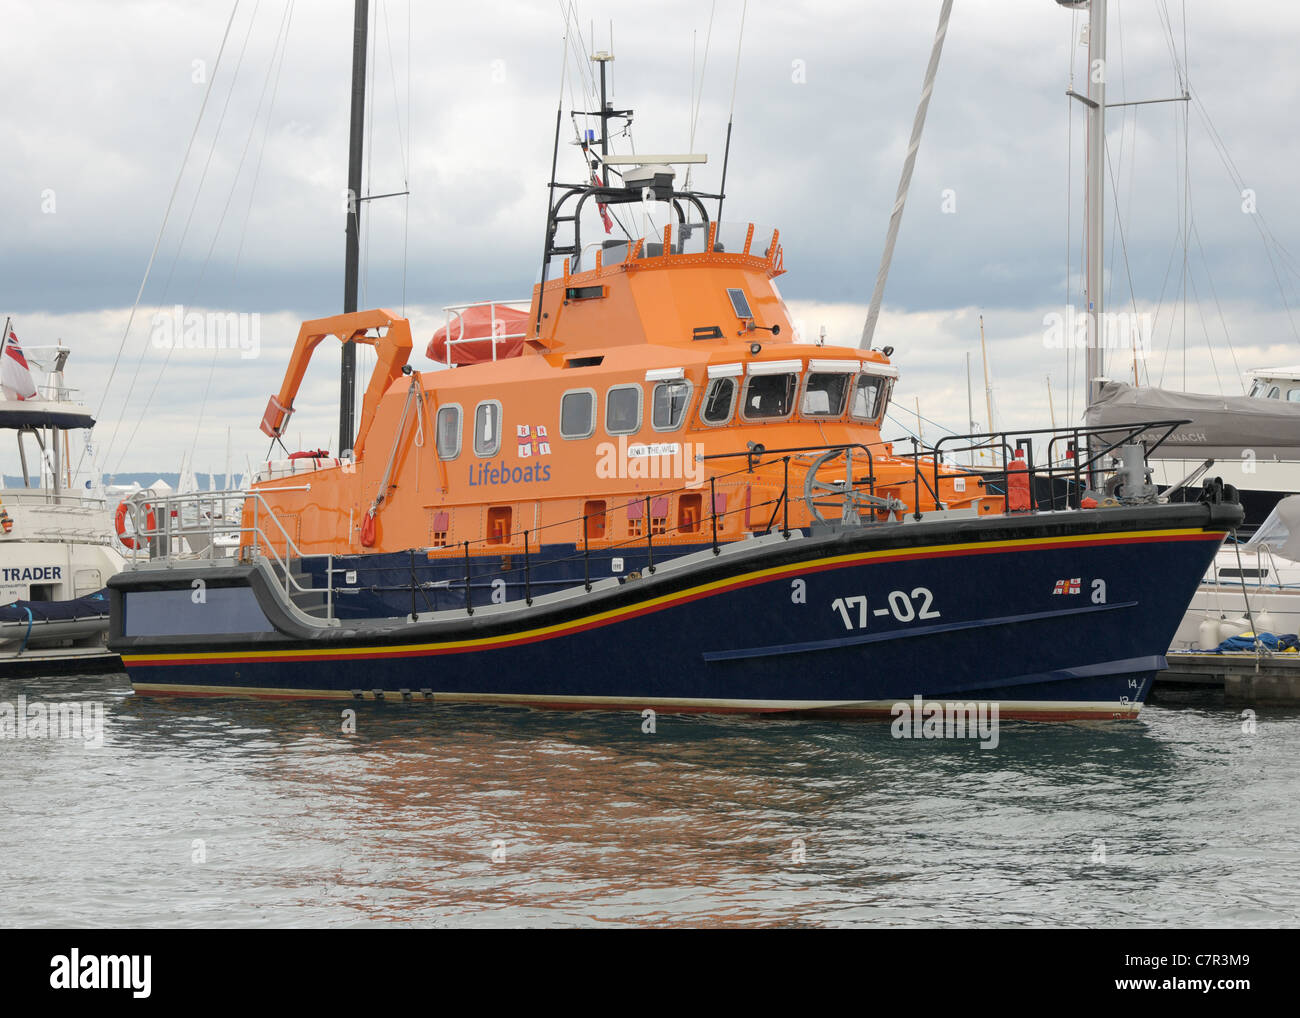 An ocean going lifeboat alongside the harbor, Cowes, Isle of Wight Stock Photo